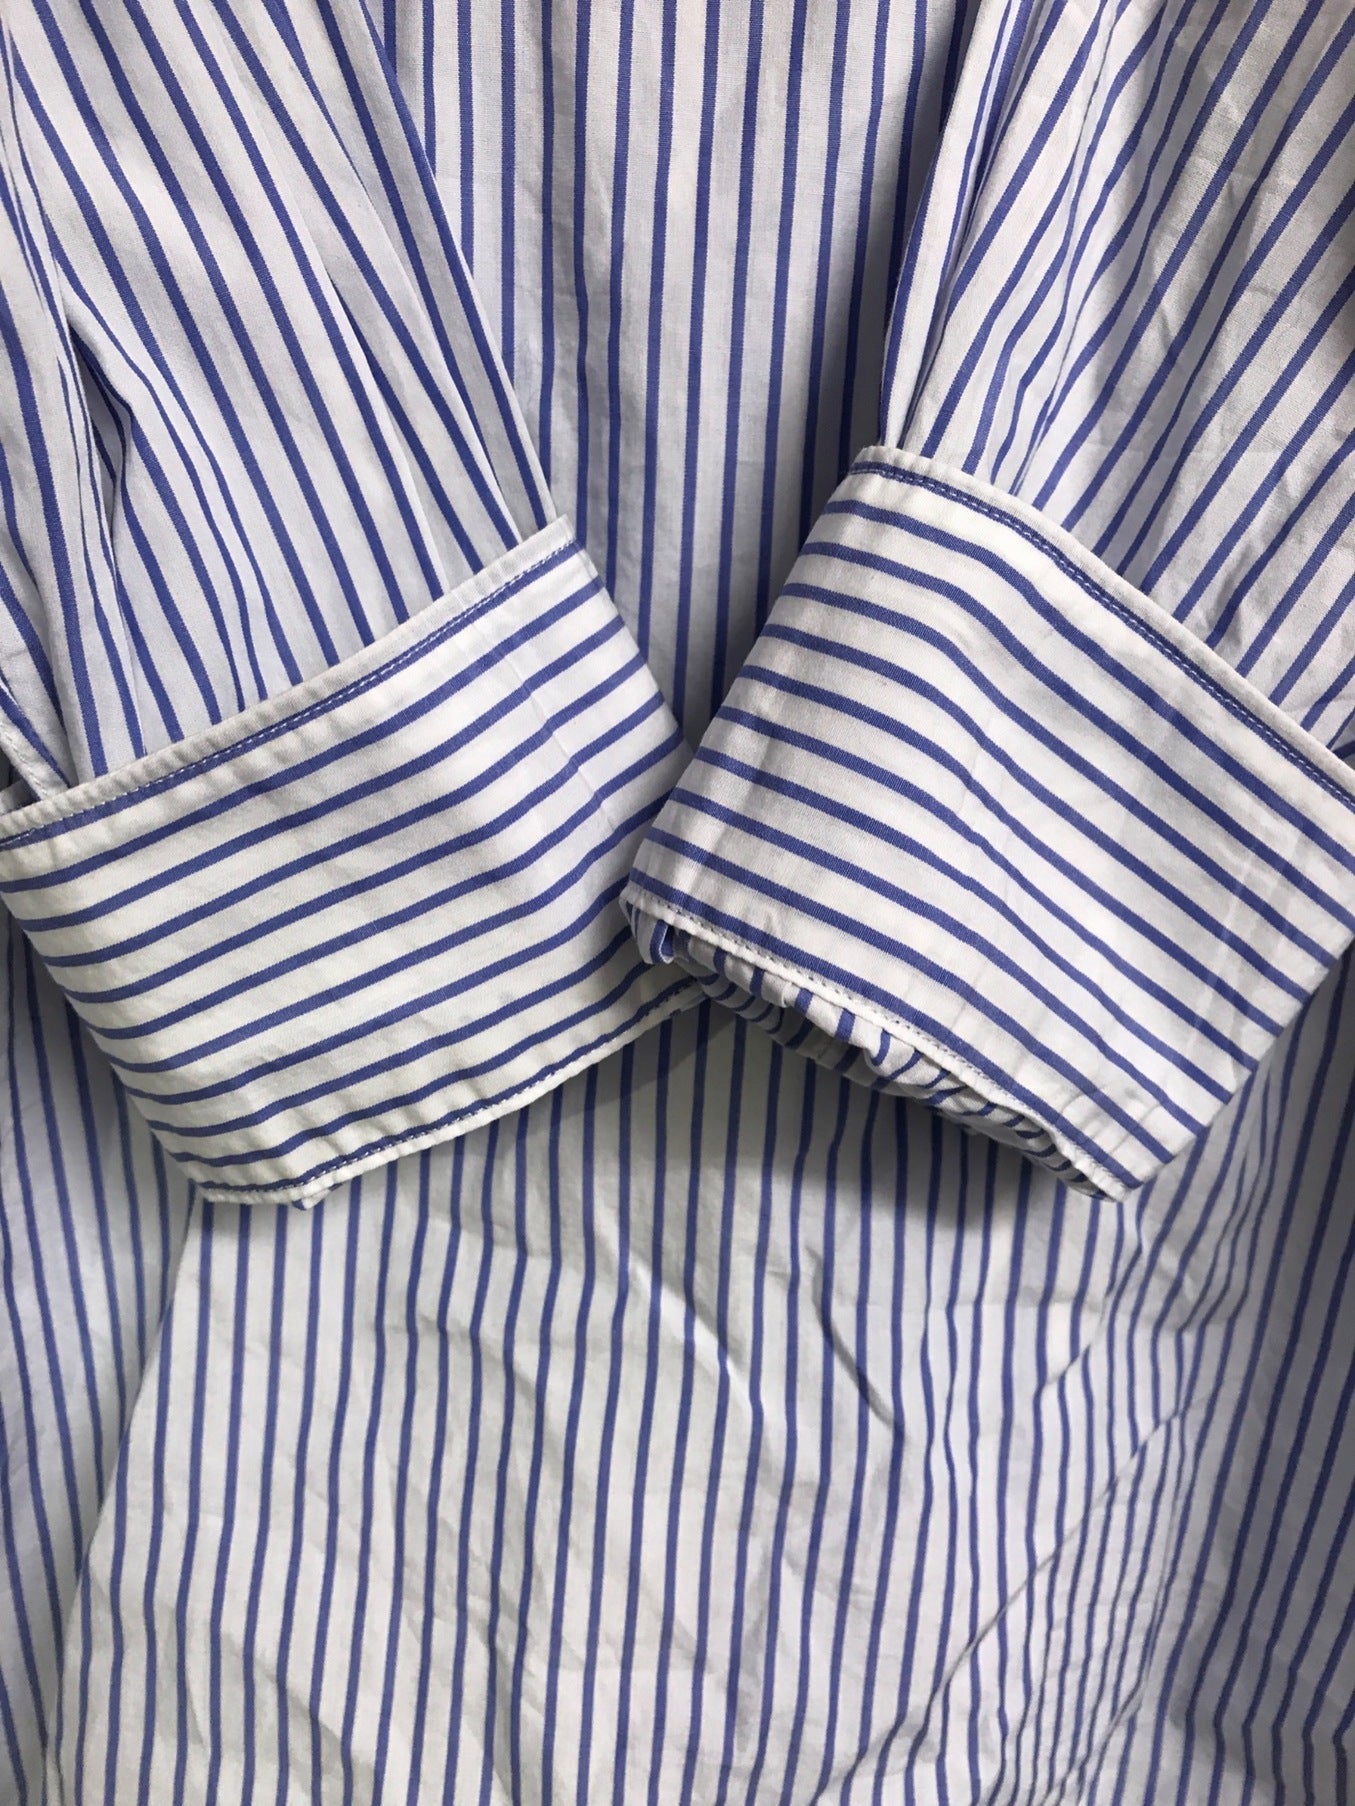 [Pre-owned] COMME des GARCONS SHIRT striped shirt W28054